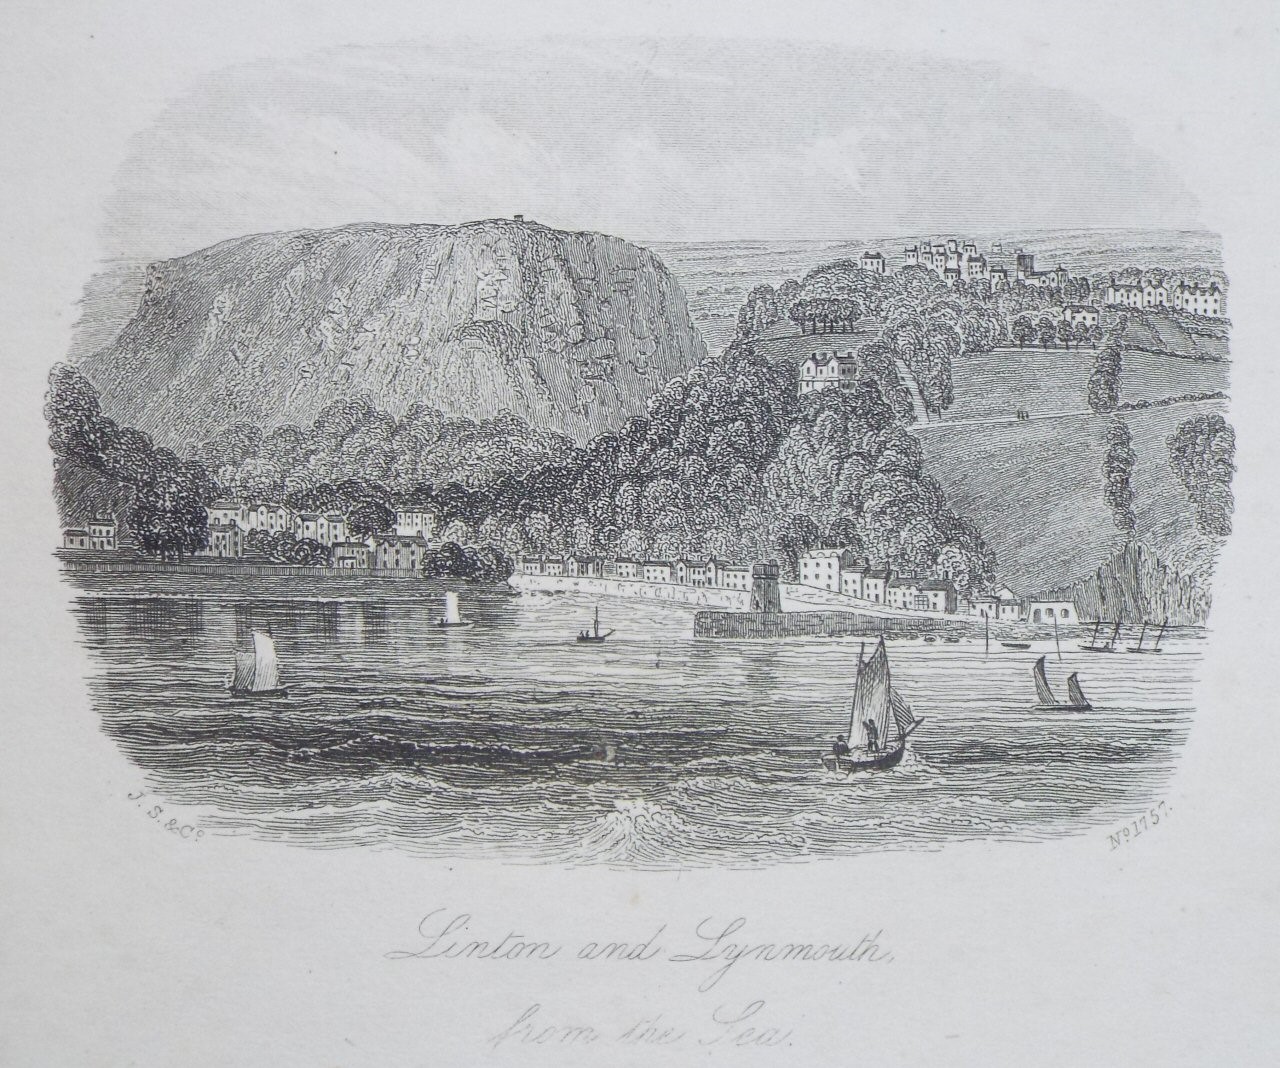 Steel Vignette - Linton & Lynmouth, from the Sea. - J